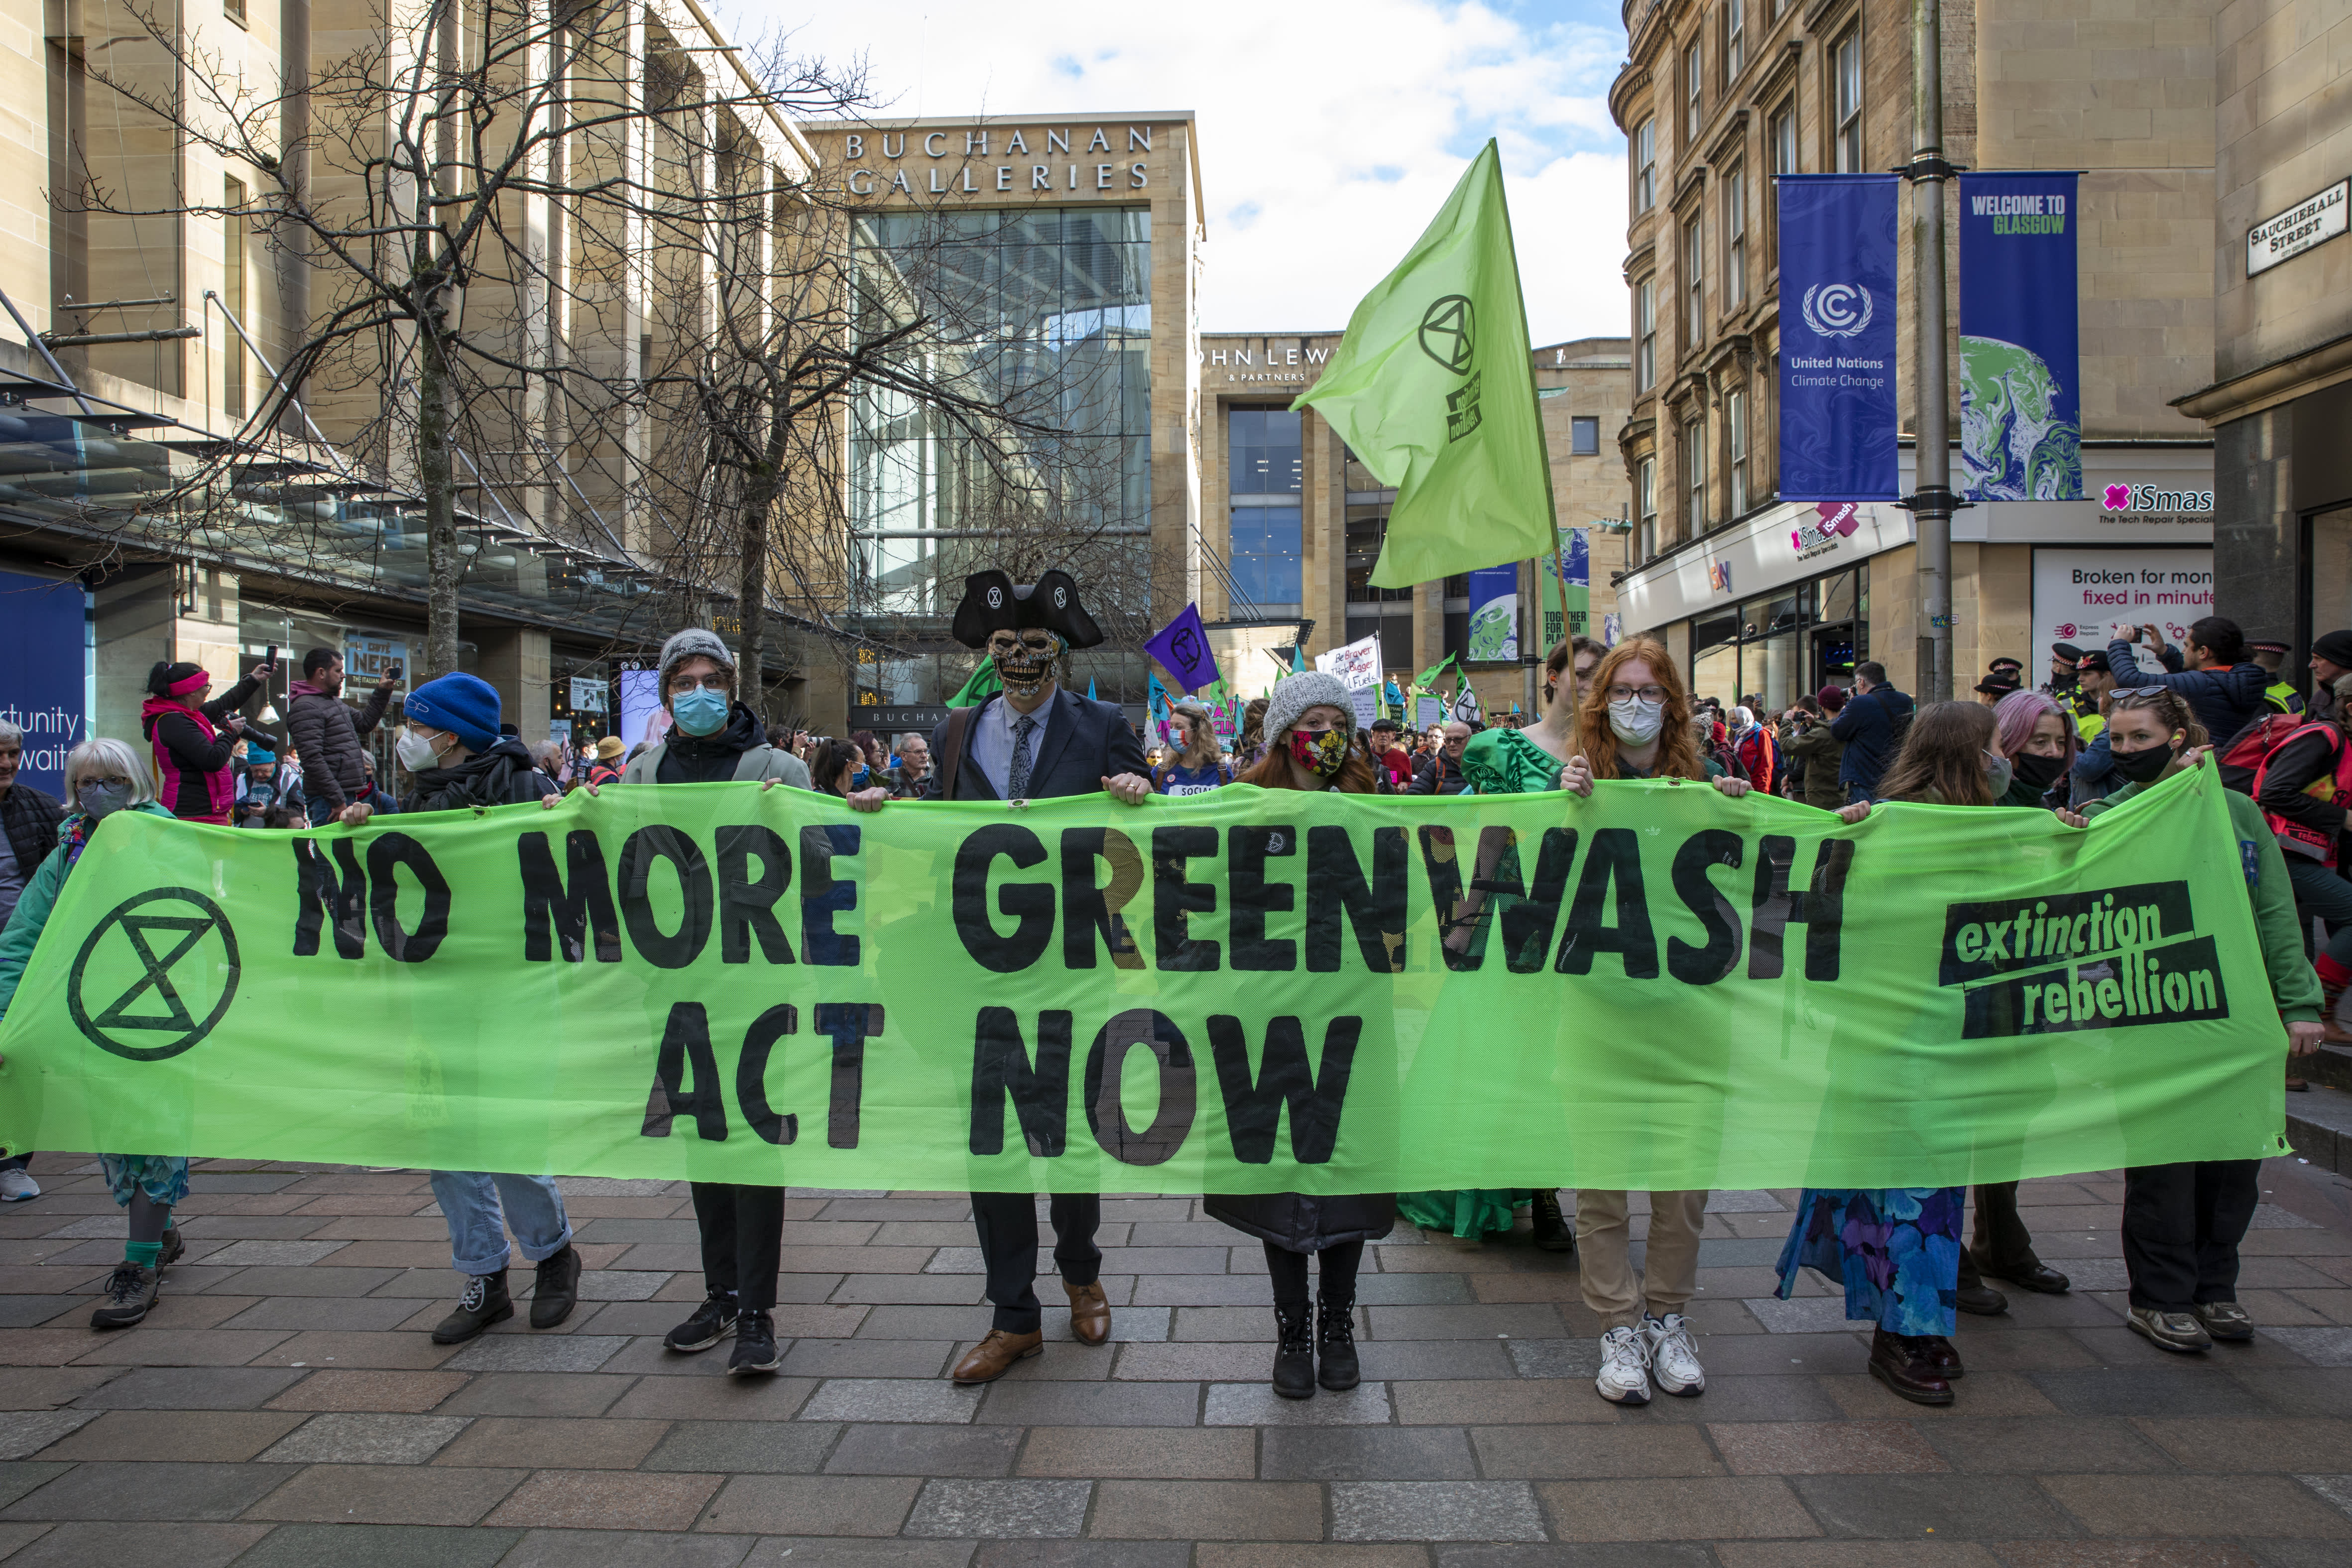 A “greenwashing” campaign in Europe has not gone well